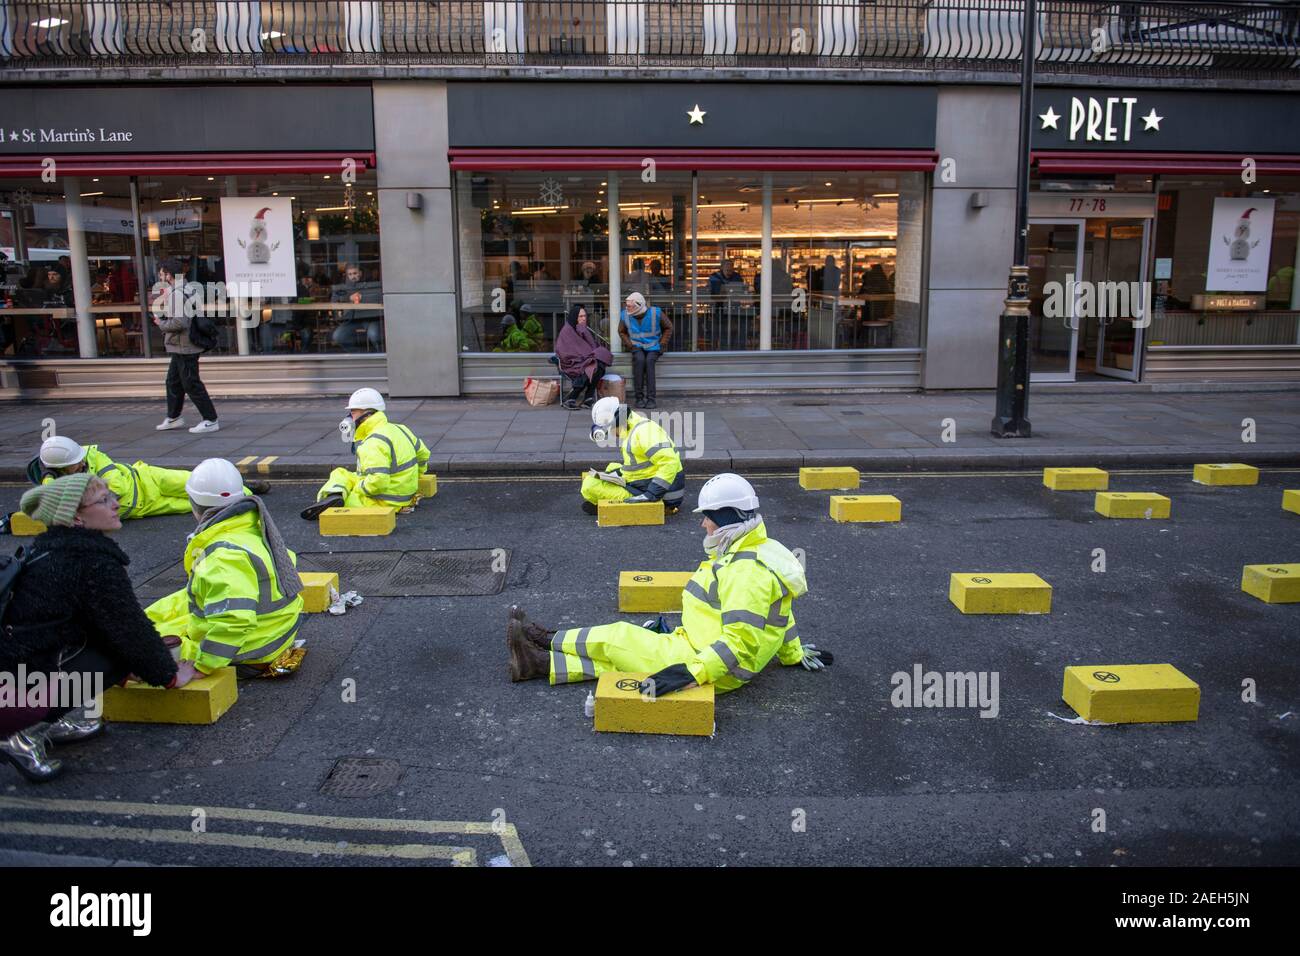 Cranbourn Street, London, UK. 9th December 2019. Extinction Rebellion protesters glue themselves onto the road in Cranbourn Street, Leicester Square, and block the road with a truck to bring attention to London’s air pollution. Credit: Malcolm Park/Alamy Live News. Stock Photo